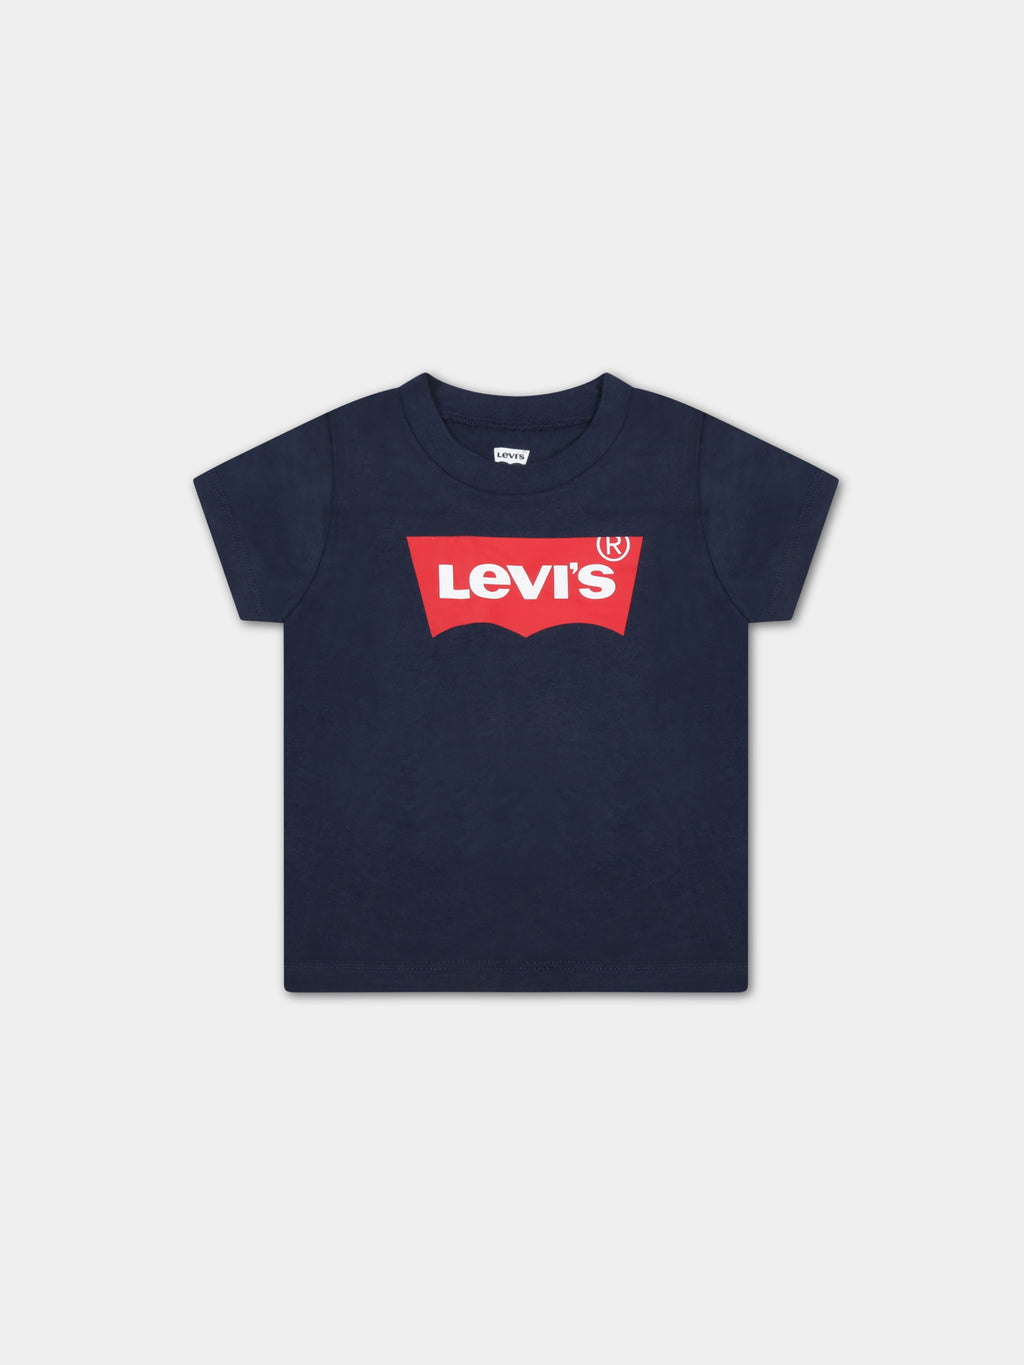 Blue T-shirt for babies with patch logo